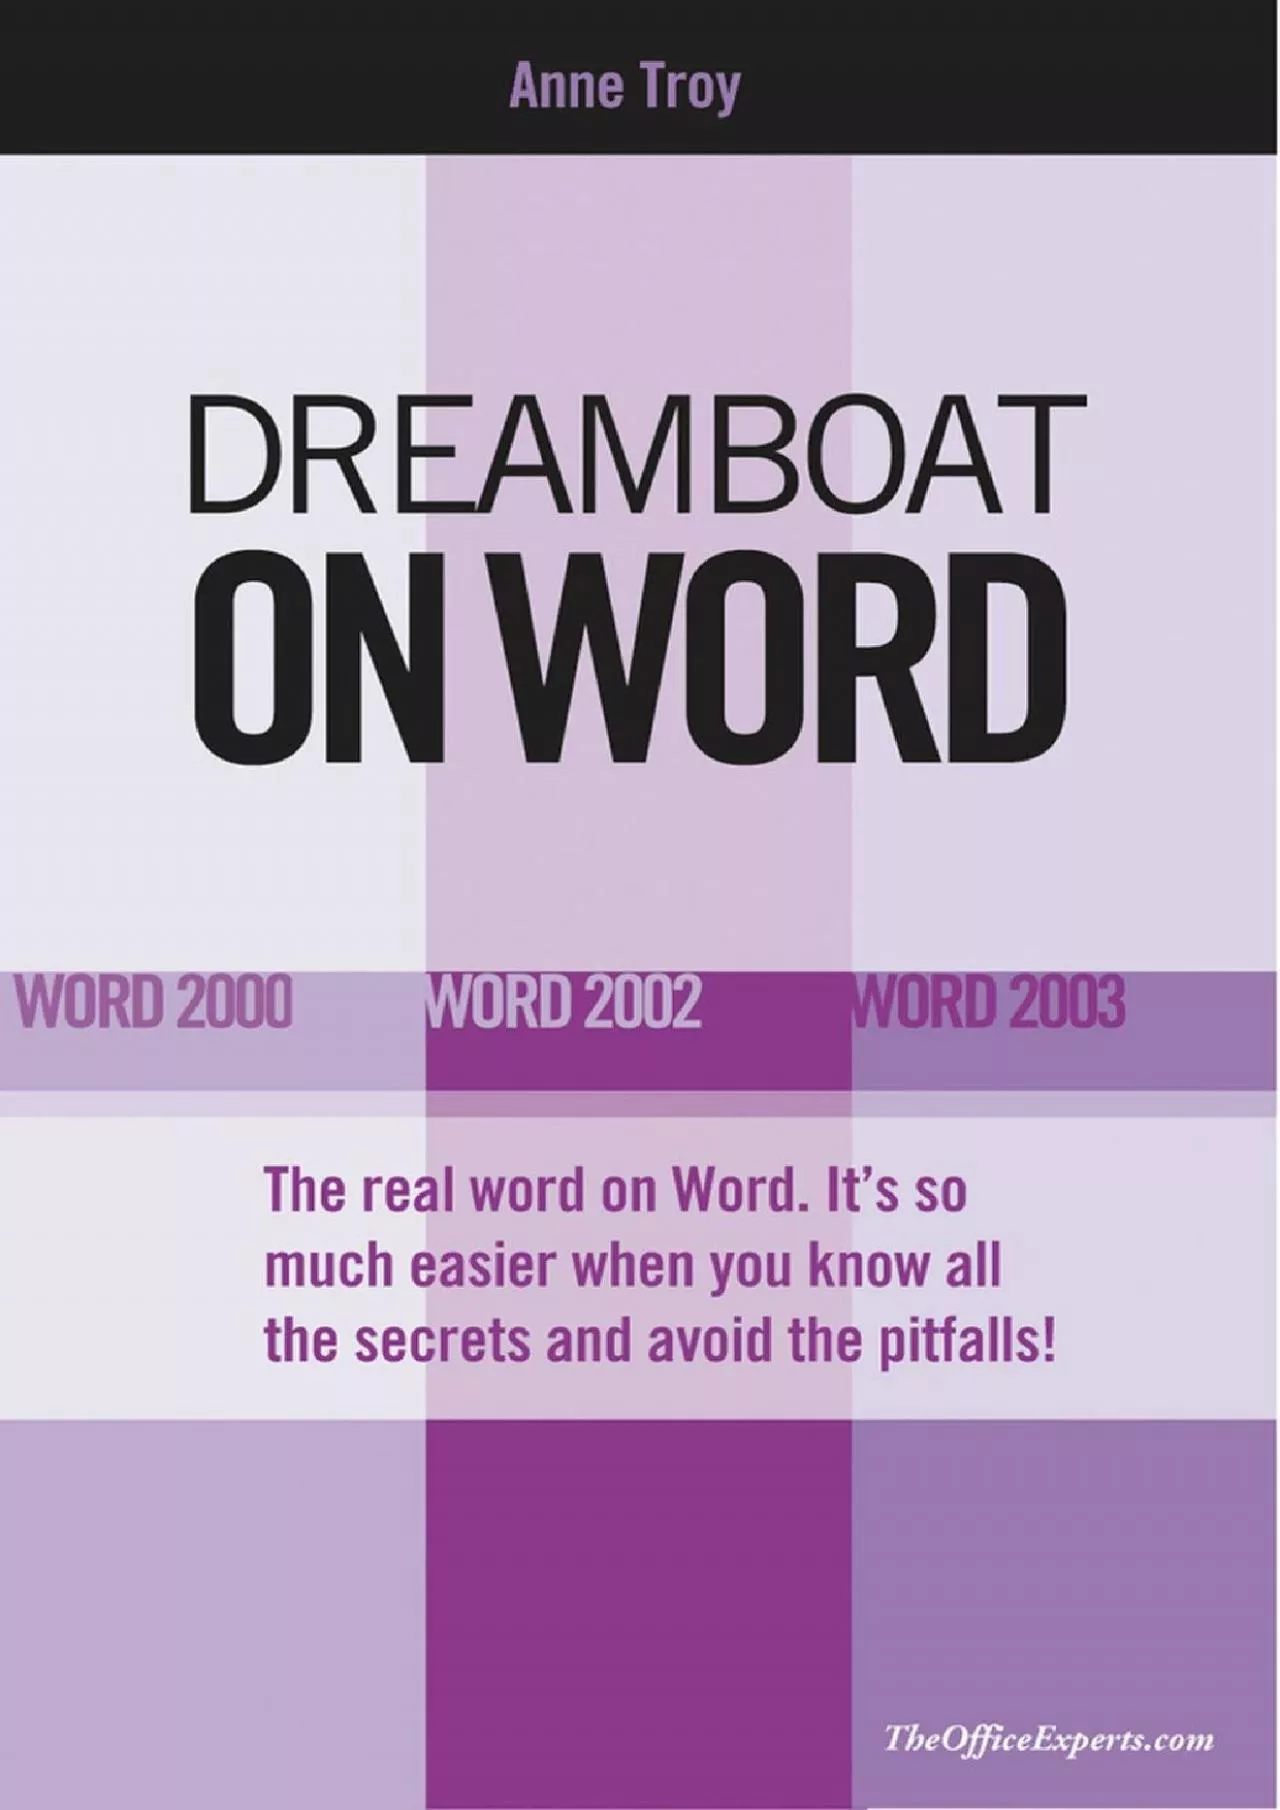 (BOOK)-Dreamboat on Word: Word 2000, Word 2002, Word 2003 (On Office series)